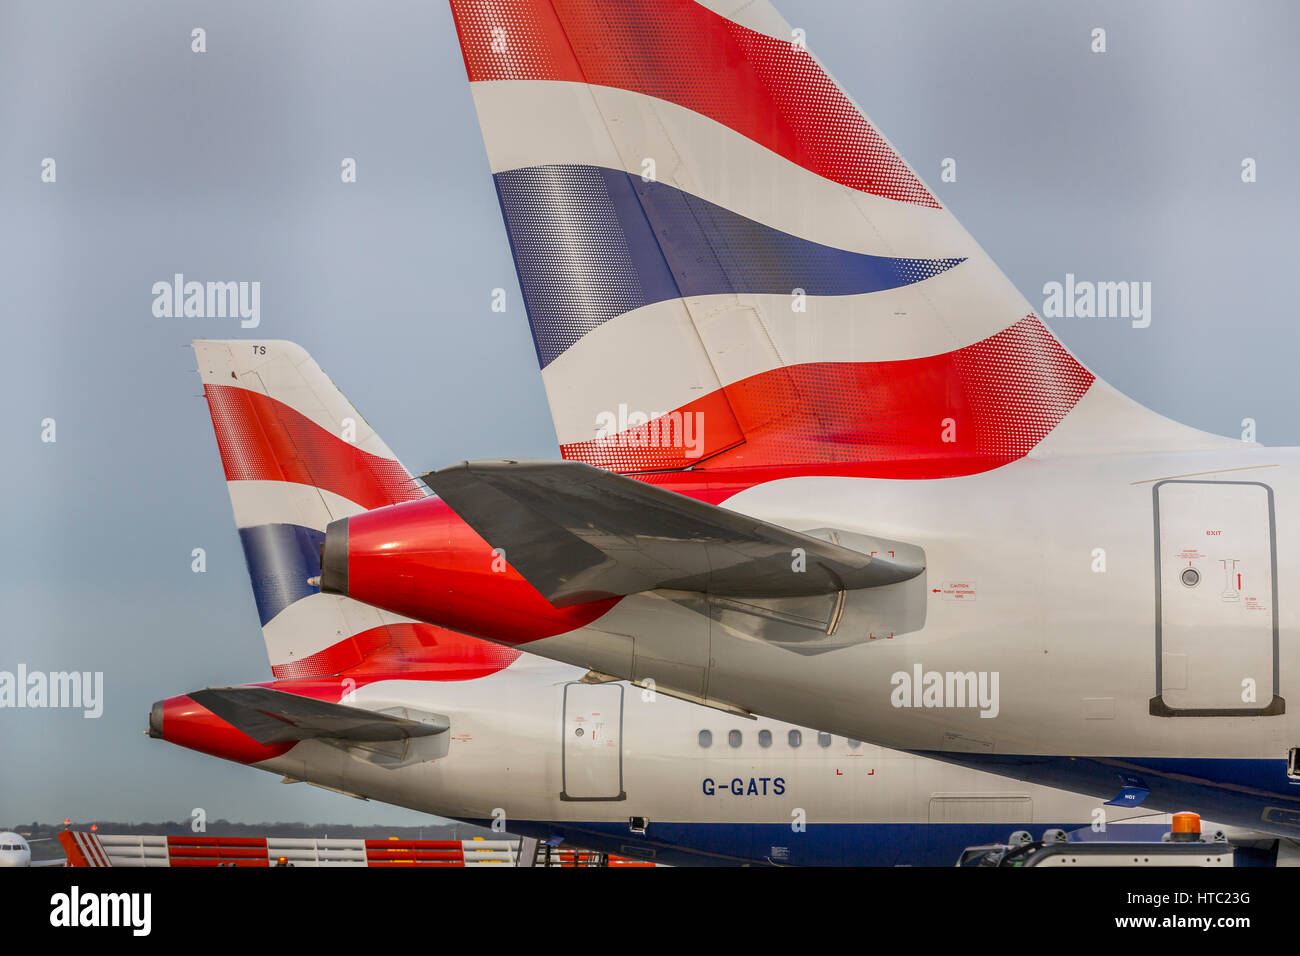 British Airways, the National carrier of England, aircraft tail planes and logo, Gatwick airport  London England UK Stock Photo